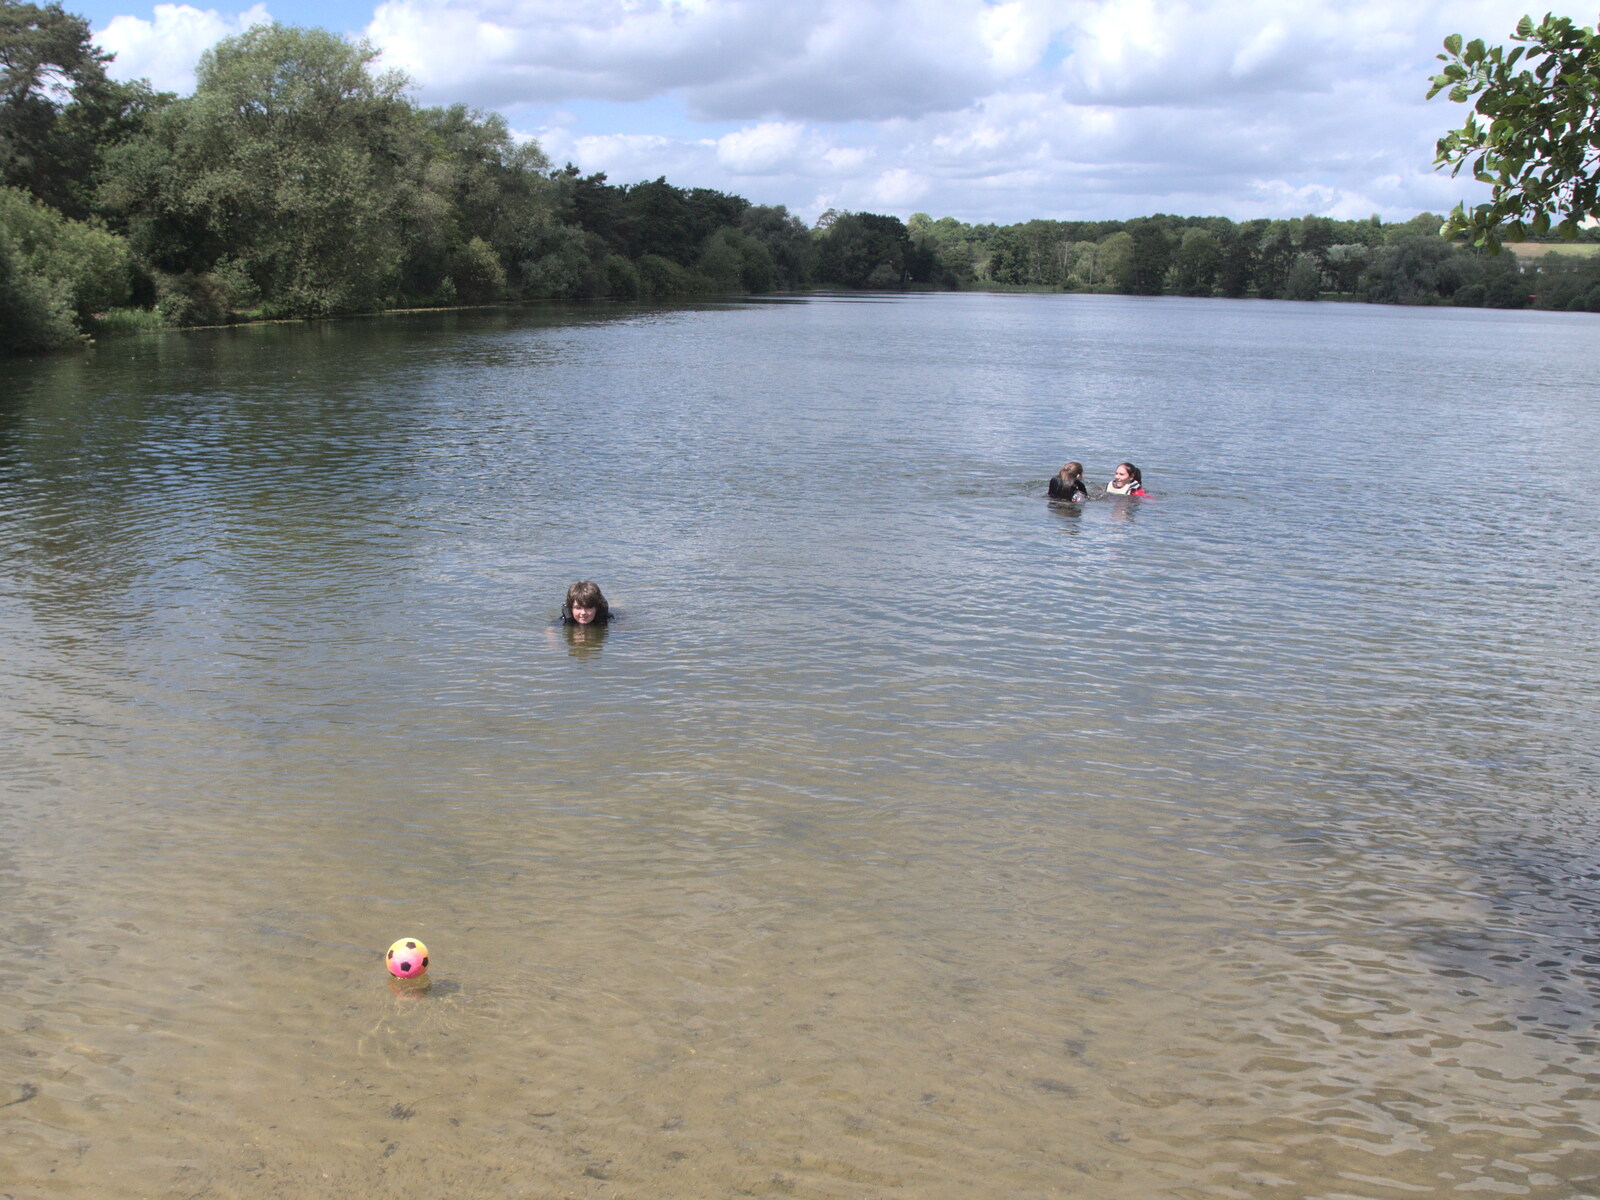 A Day at the Lake, Weybread Pits, Harleston, Norfolk - 11th June 2022: The gang has a shallow swim in the lake